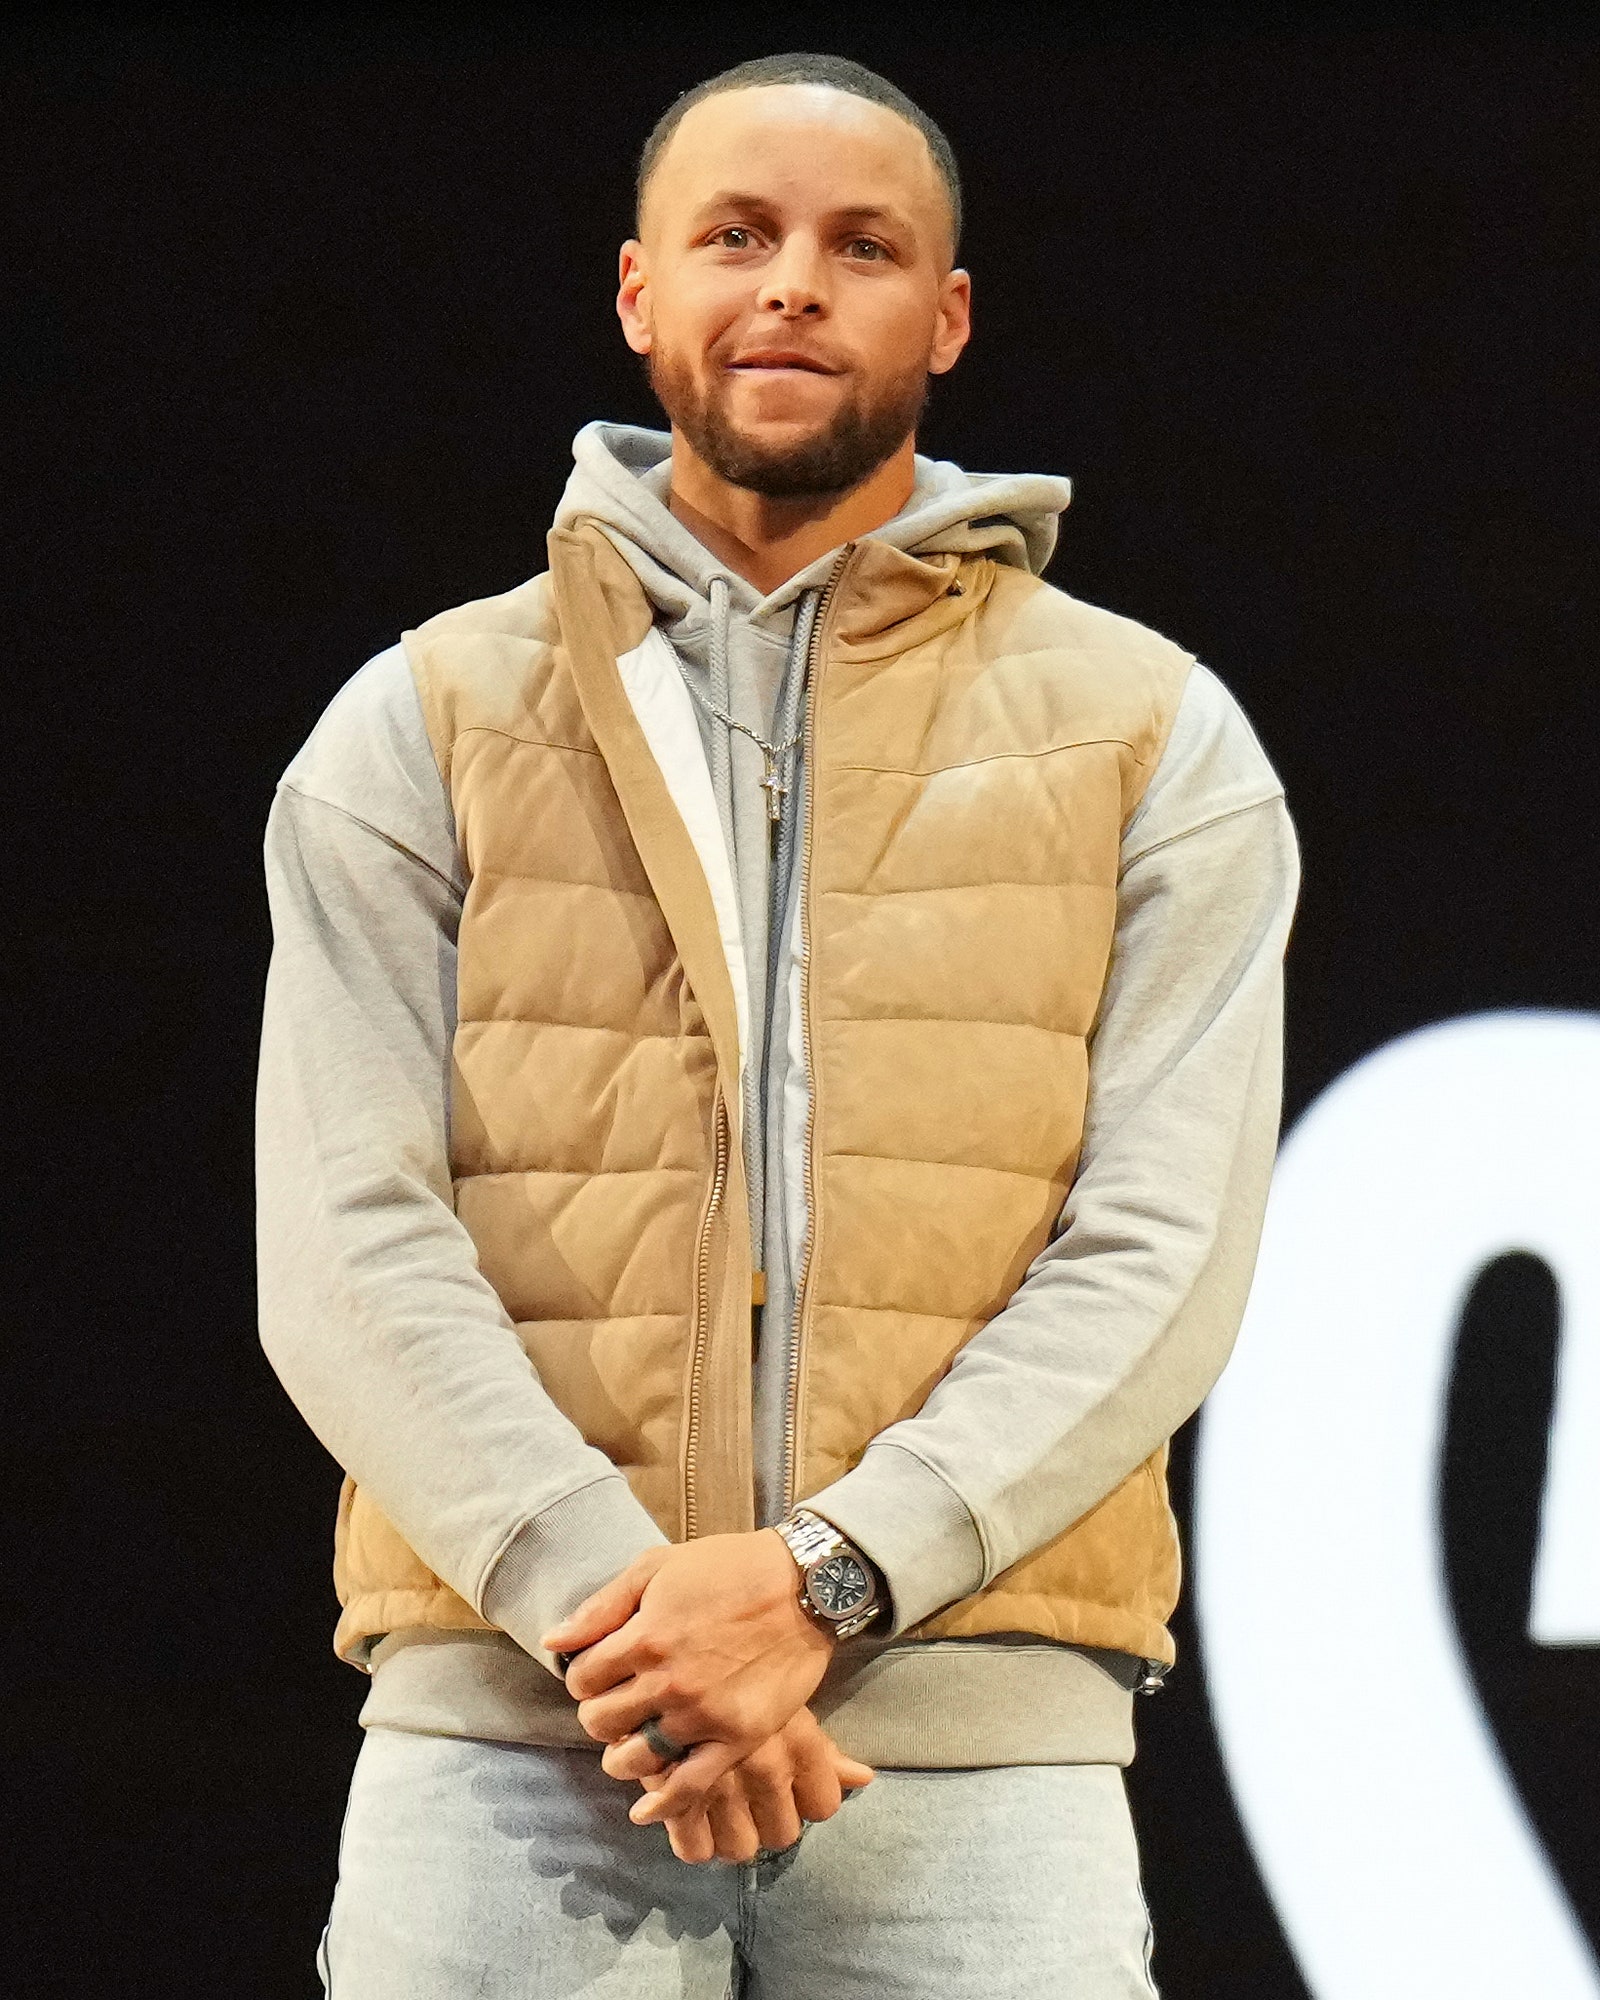 Basketball player Stephen Curry with a Patek Philippe Nautilus